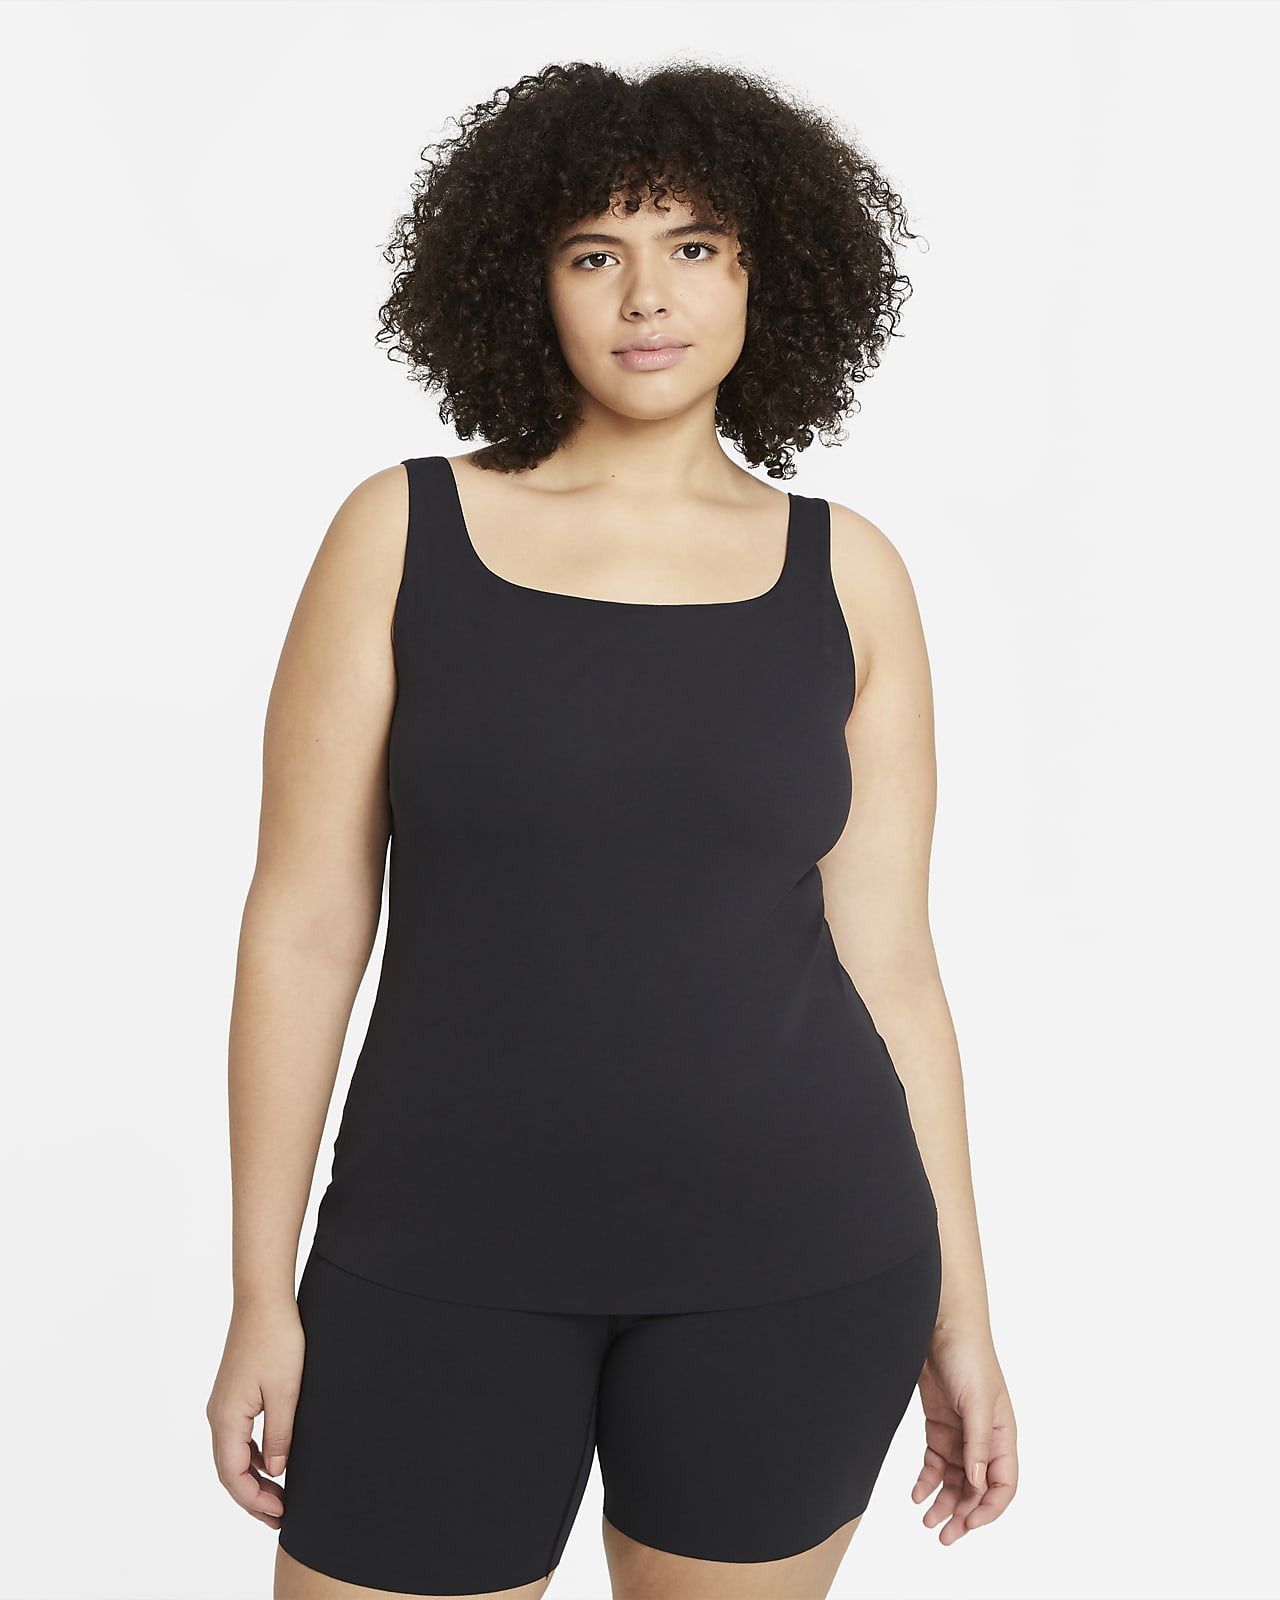 Plus Size FLX Affirmation Camisole with Built-In Bra